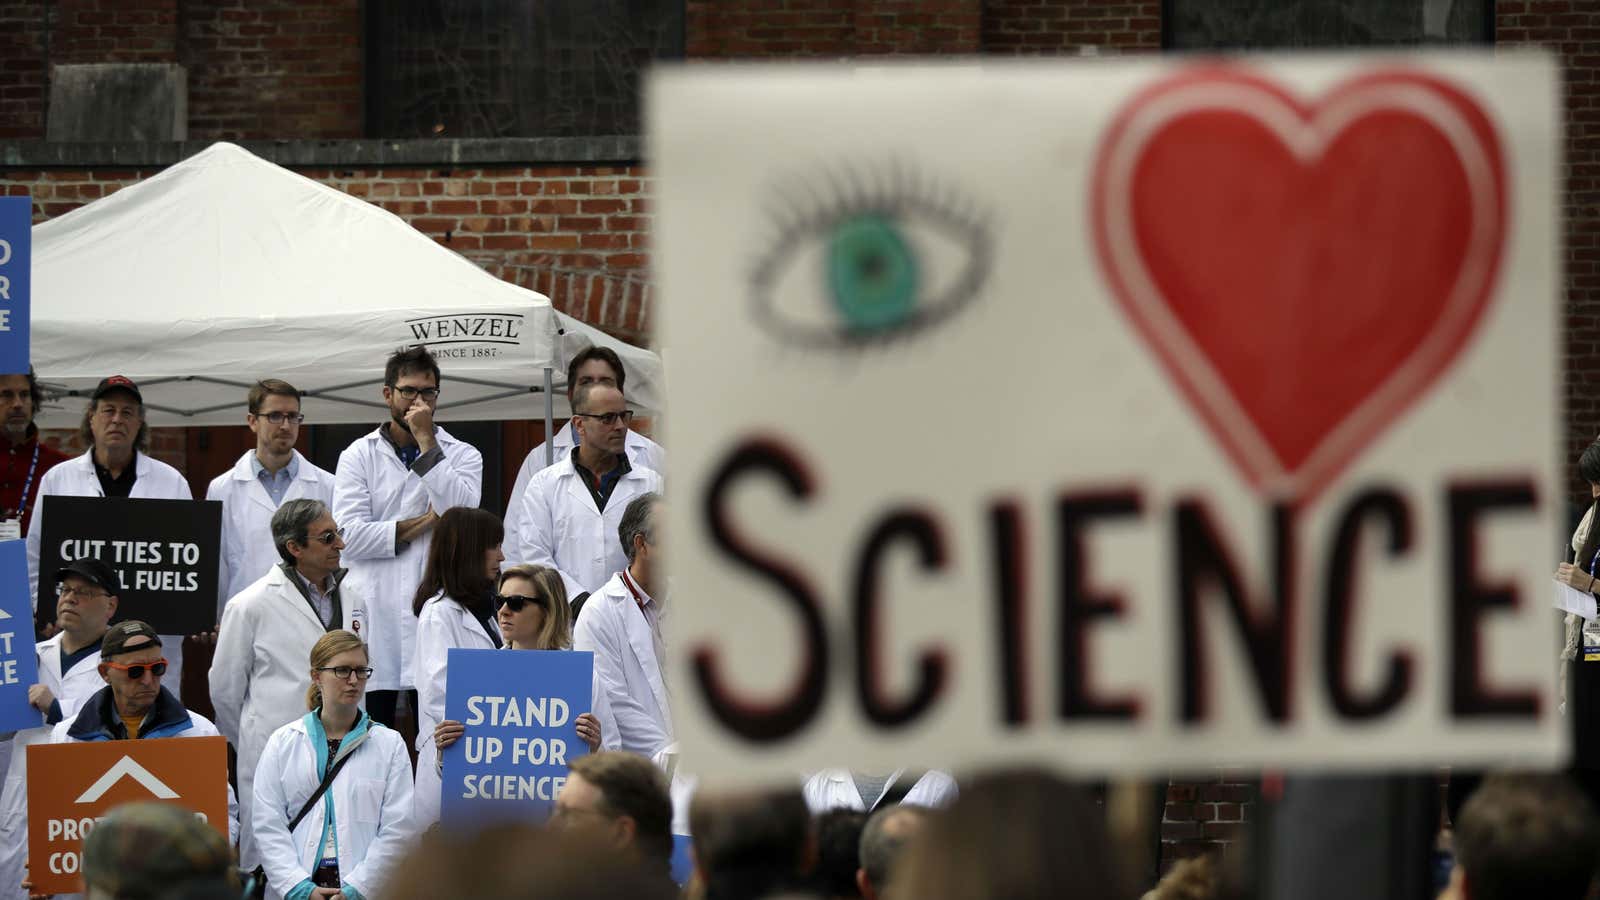 Stand up for all science